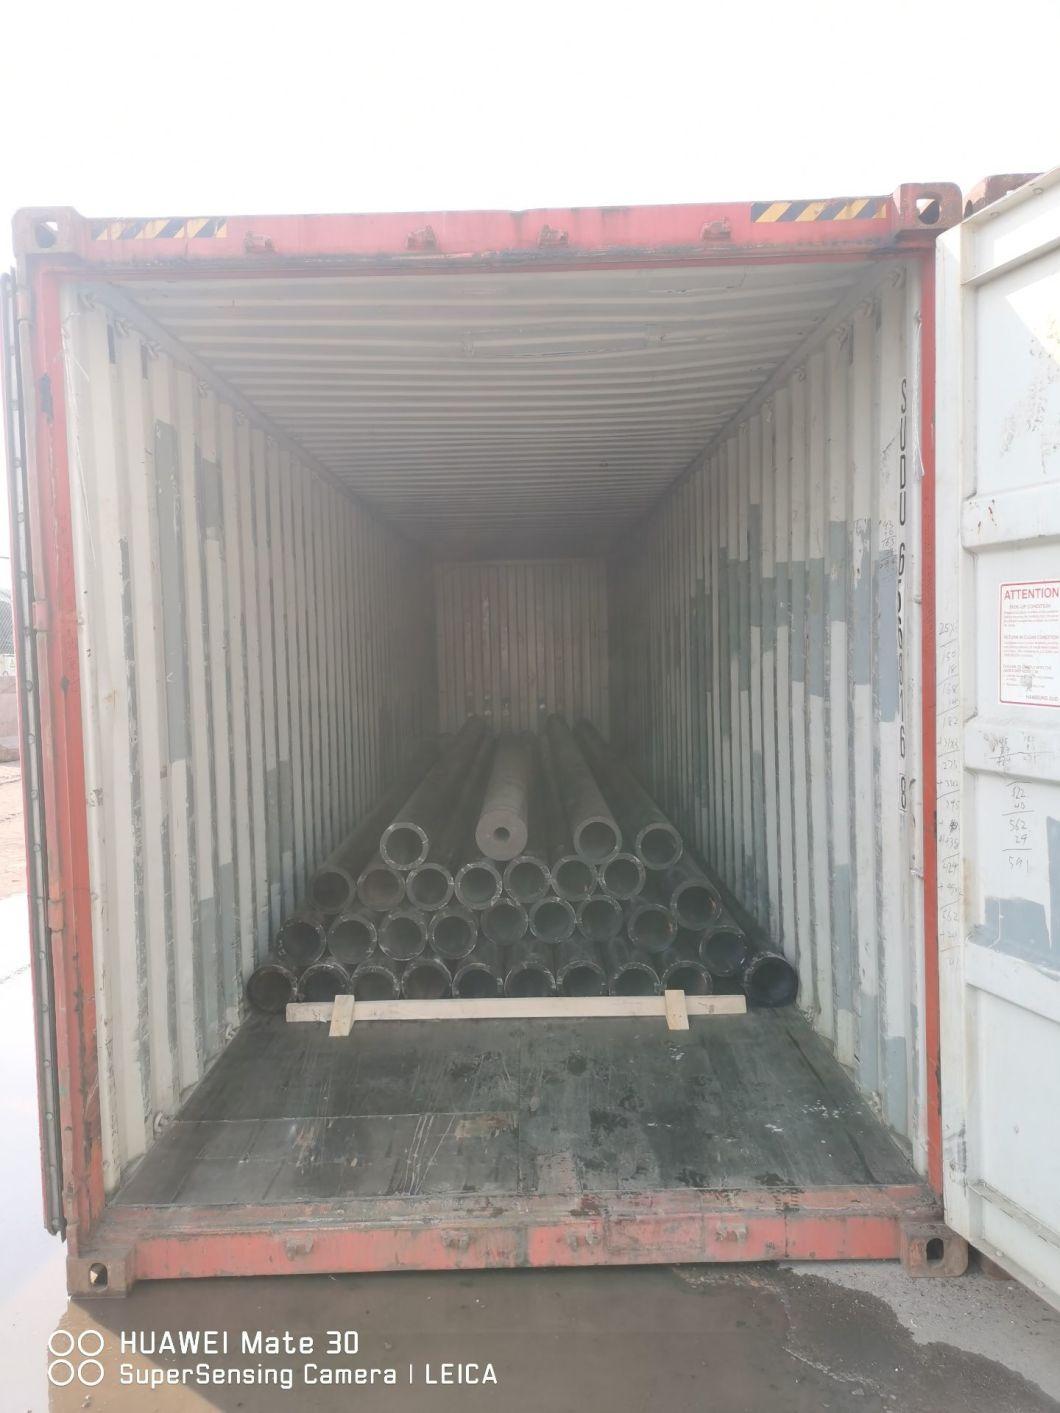 3/4 Inch Carbon Steel Seamless Pipe DN 20 Sch 40 Hot Rolled Seamless Steel Tube